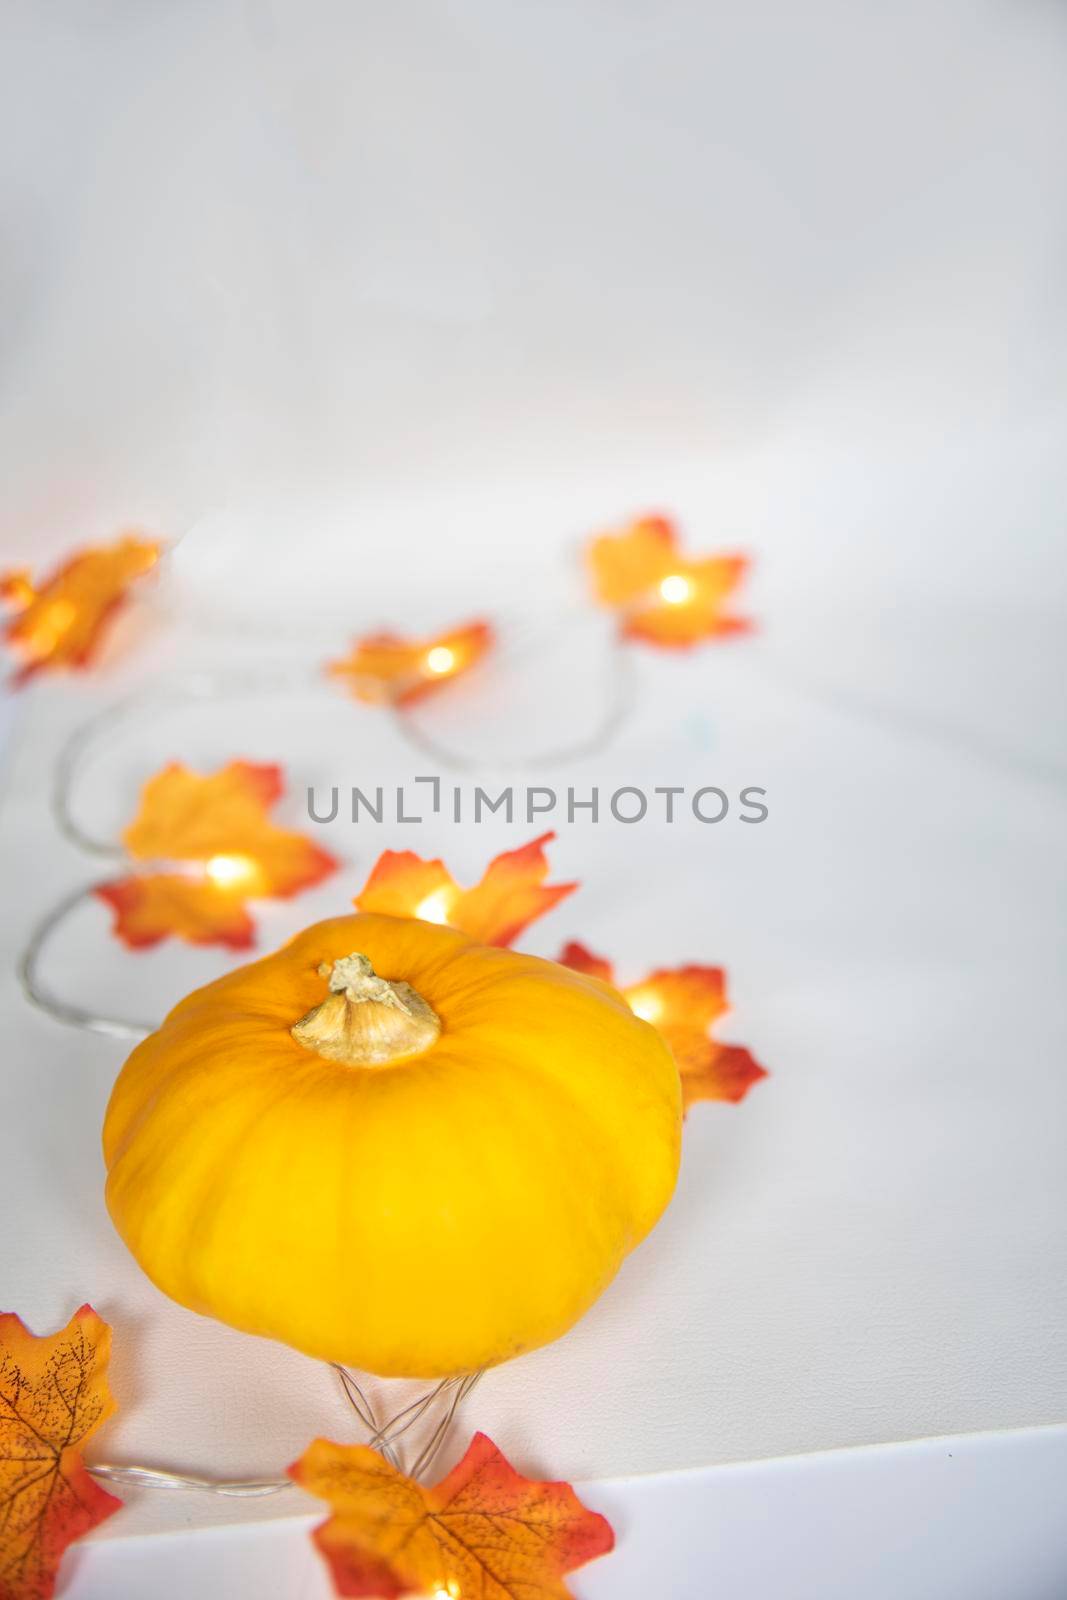 Autumn border arrangement of orange pumpkin and colorful leaves with bokeh lights a off white background, bright modern decoration, copy space space for text